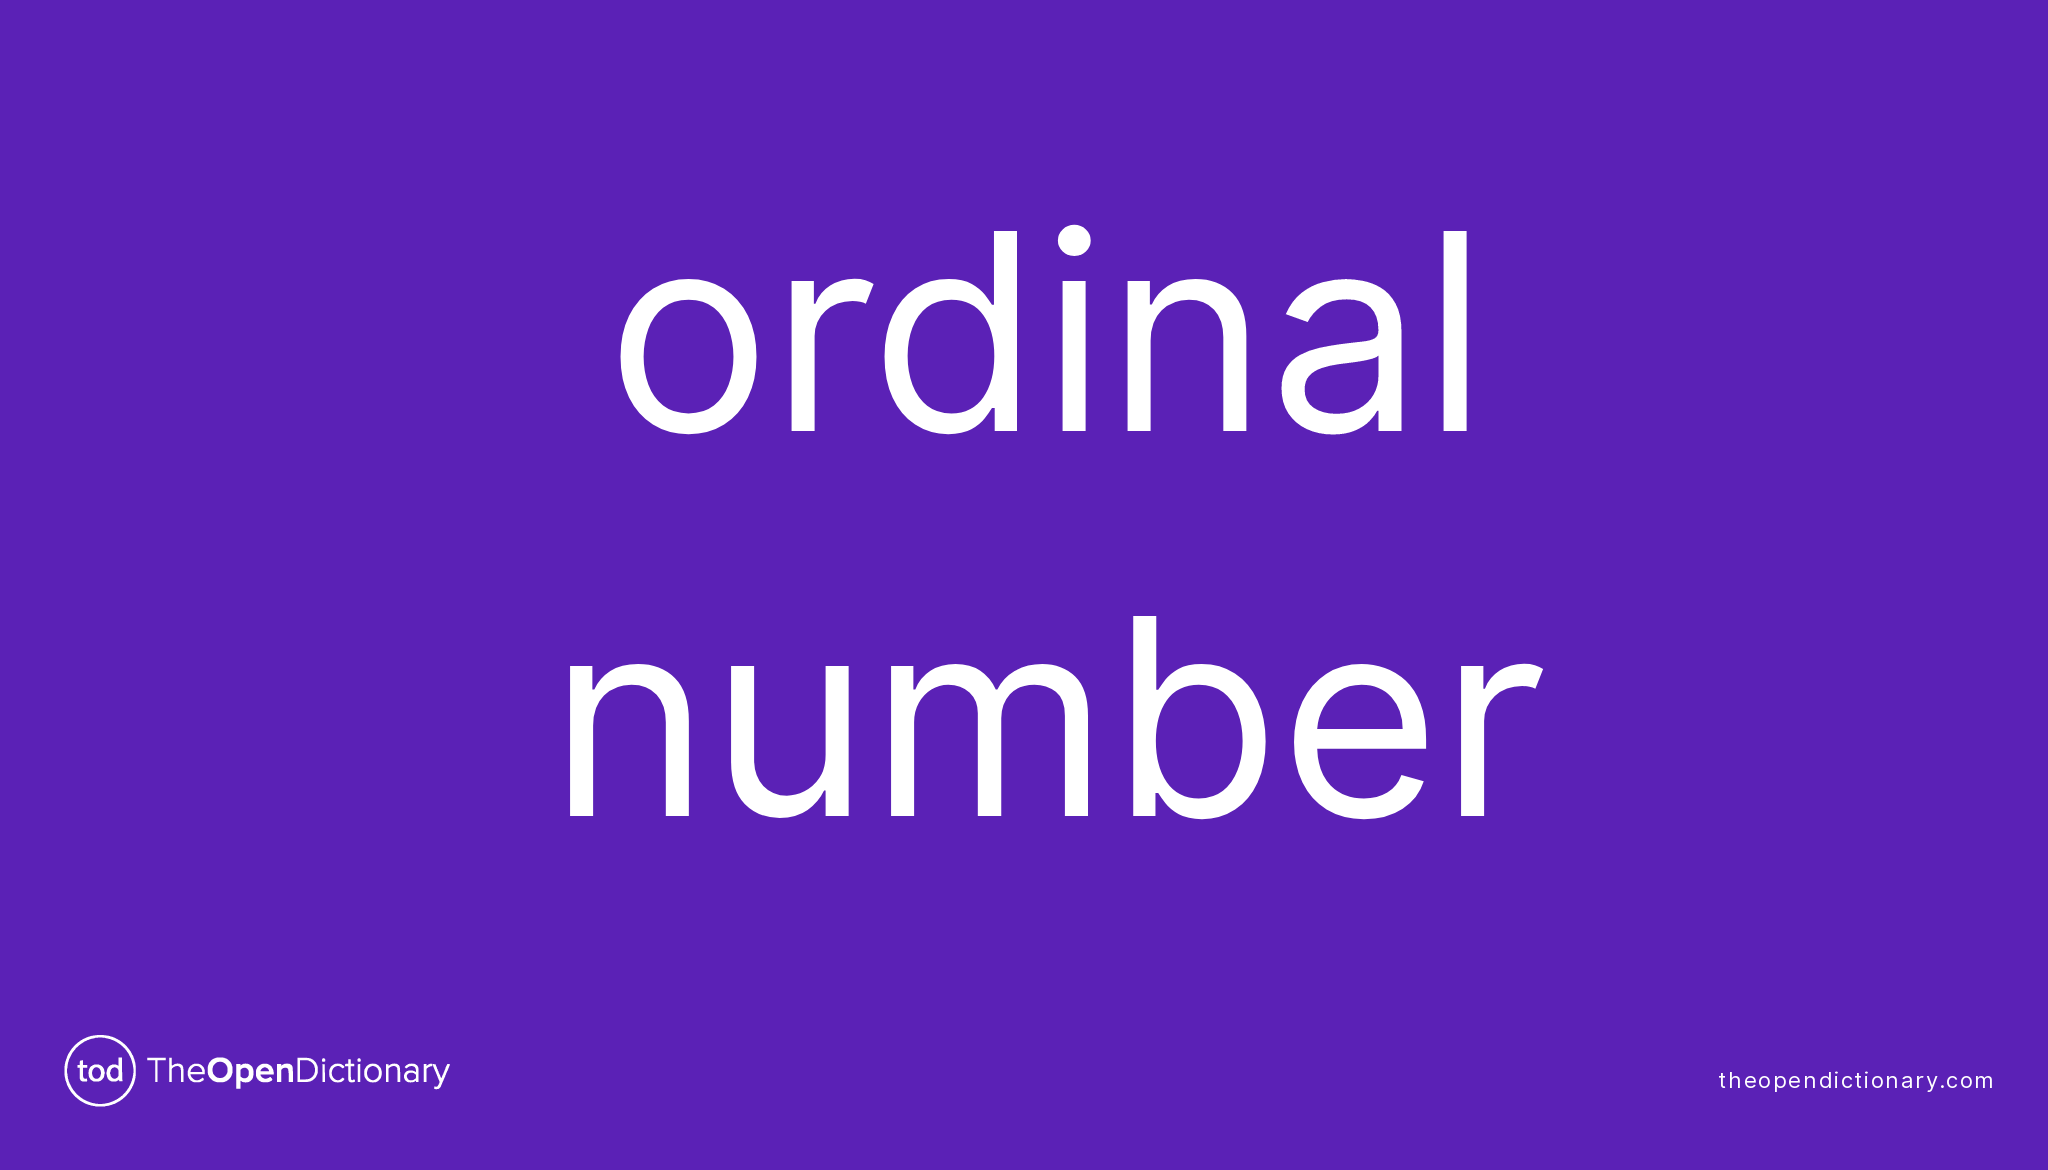 ordinal-number-meaning-of-ordinal-number-definition-of-ordinal